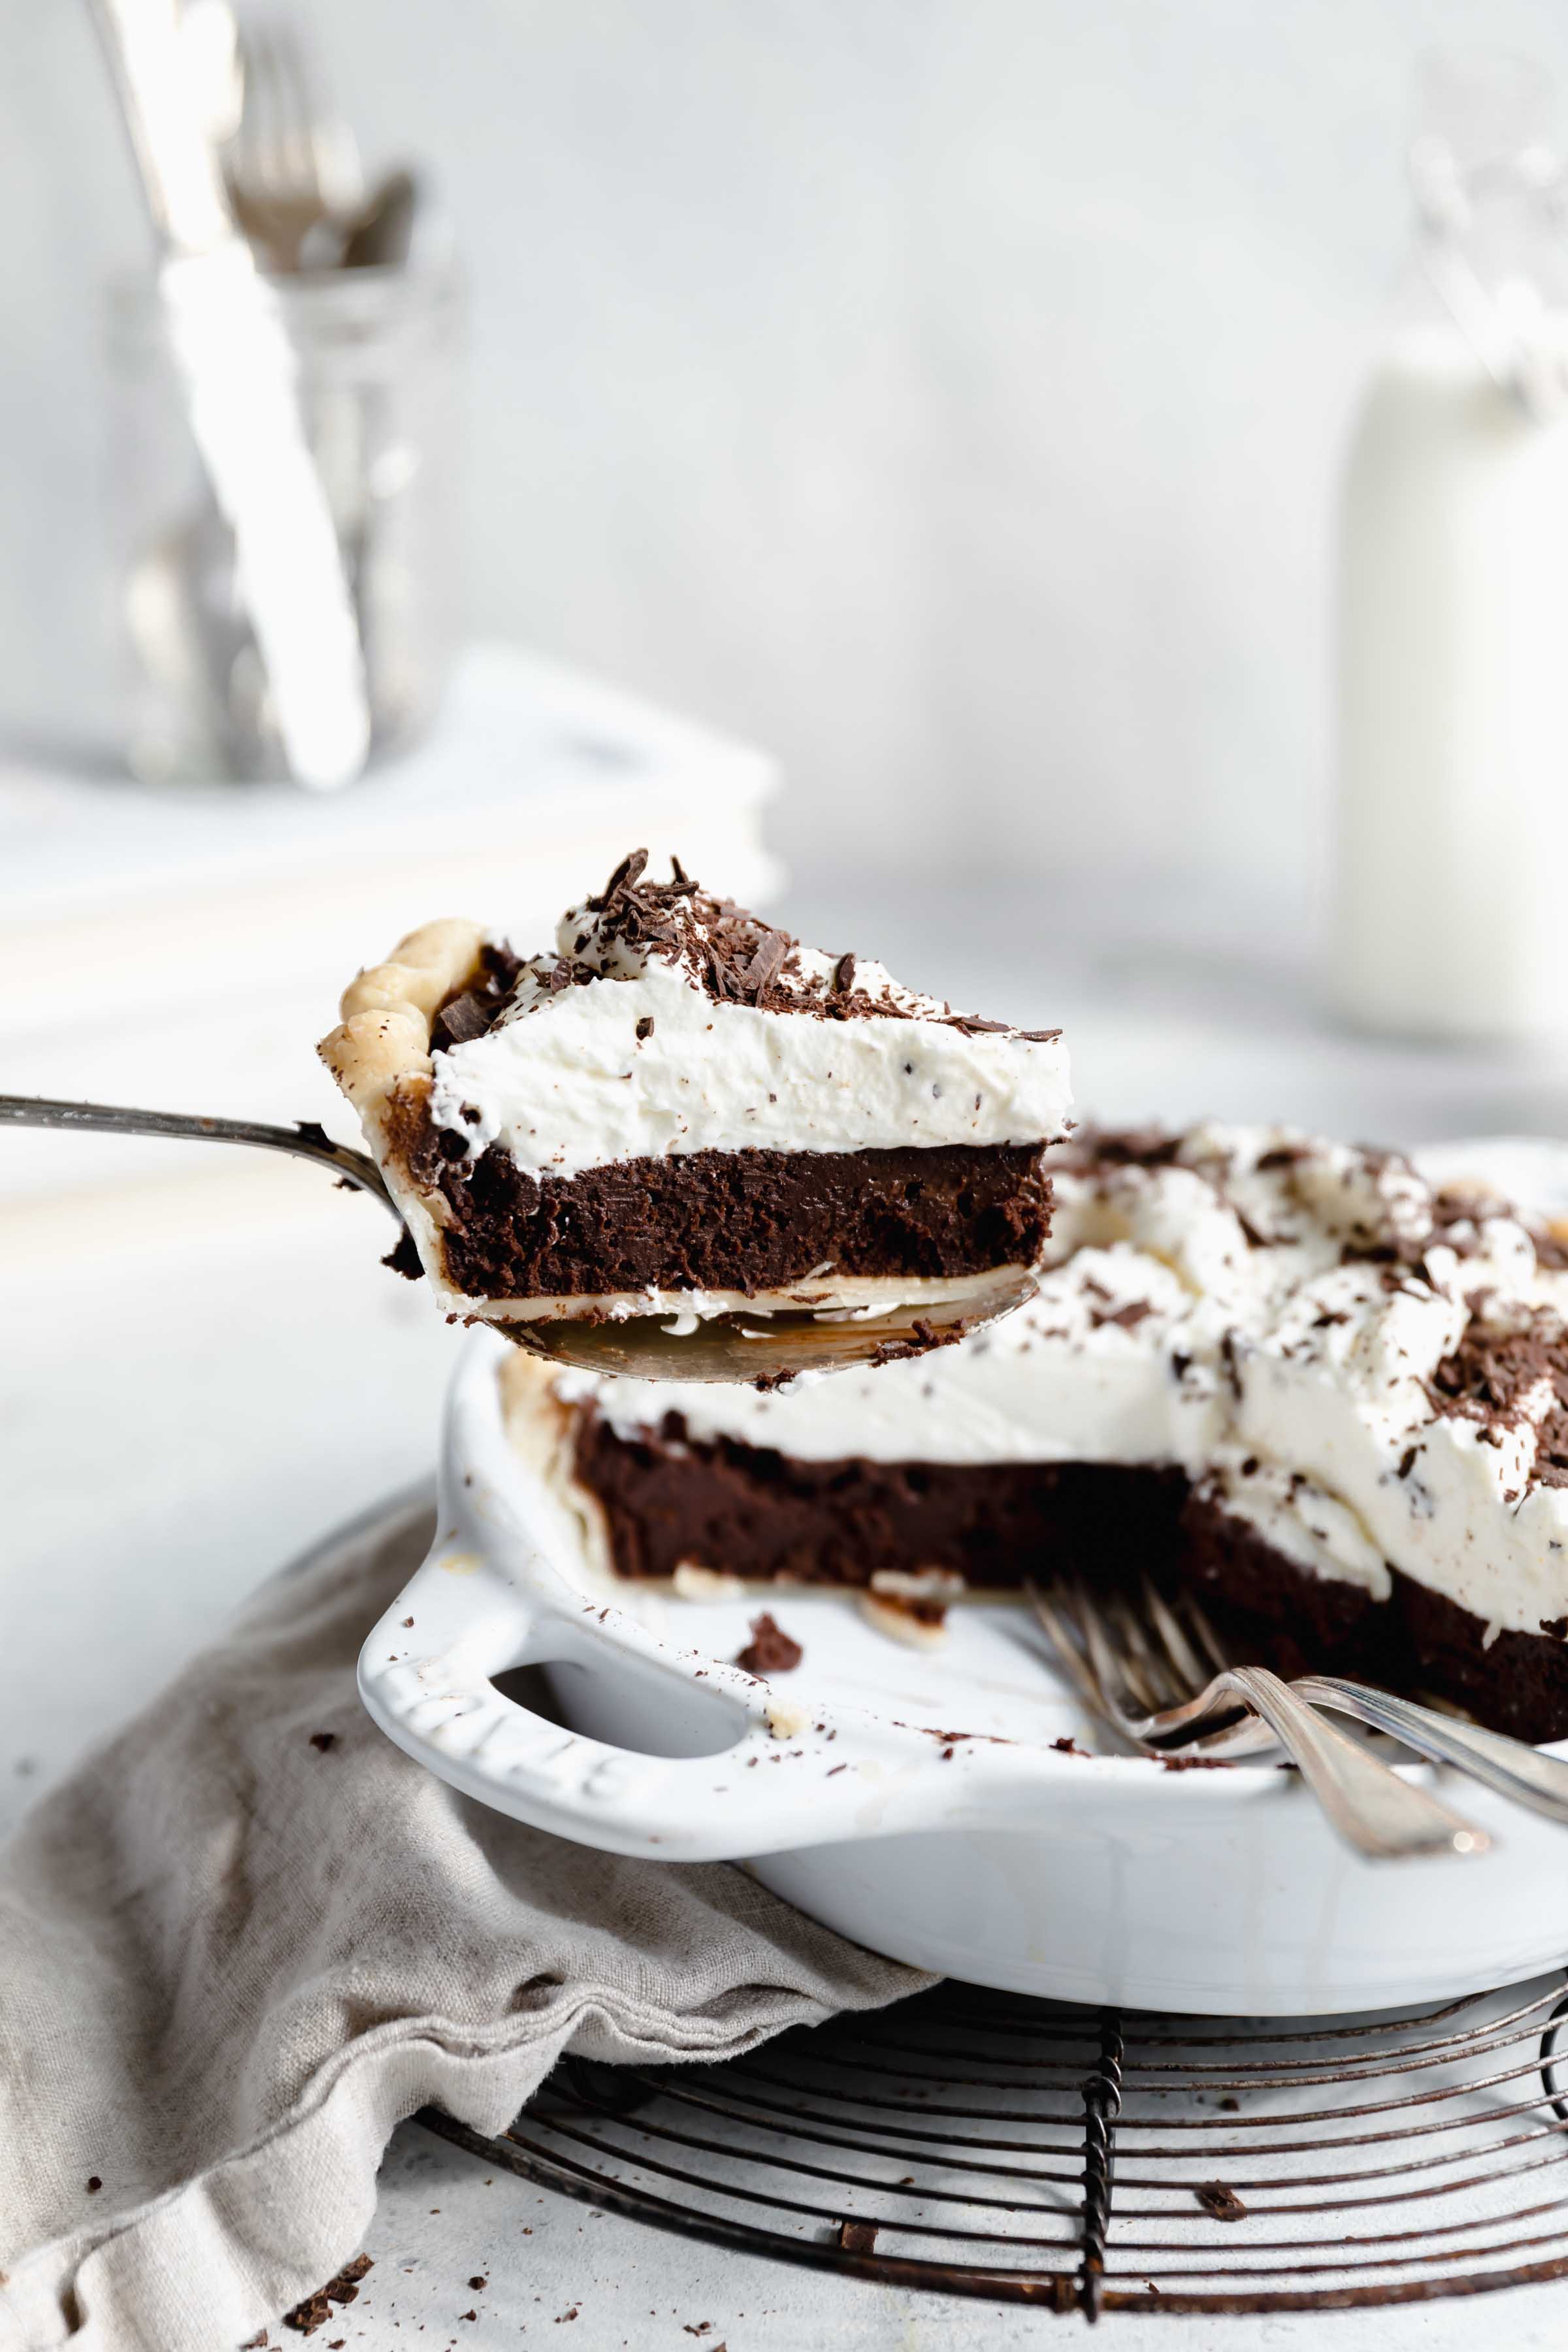 This deliciously fudgy chocolate cream pie is the perfect addition to your thanksgiving table this year!